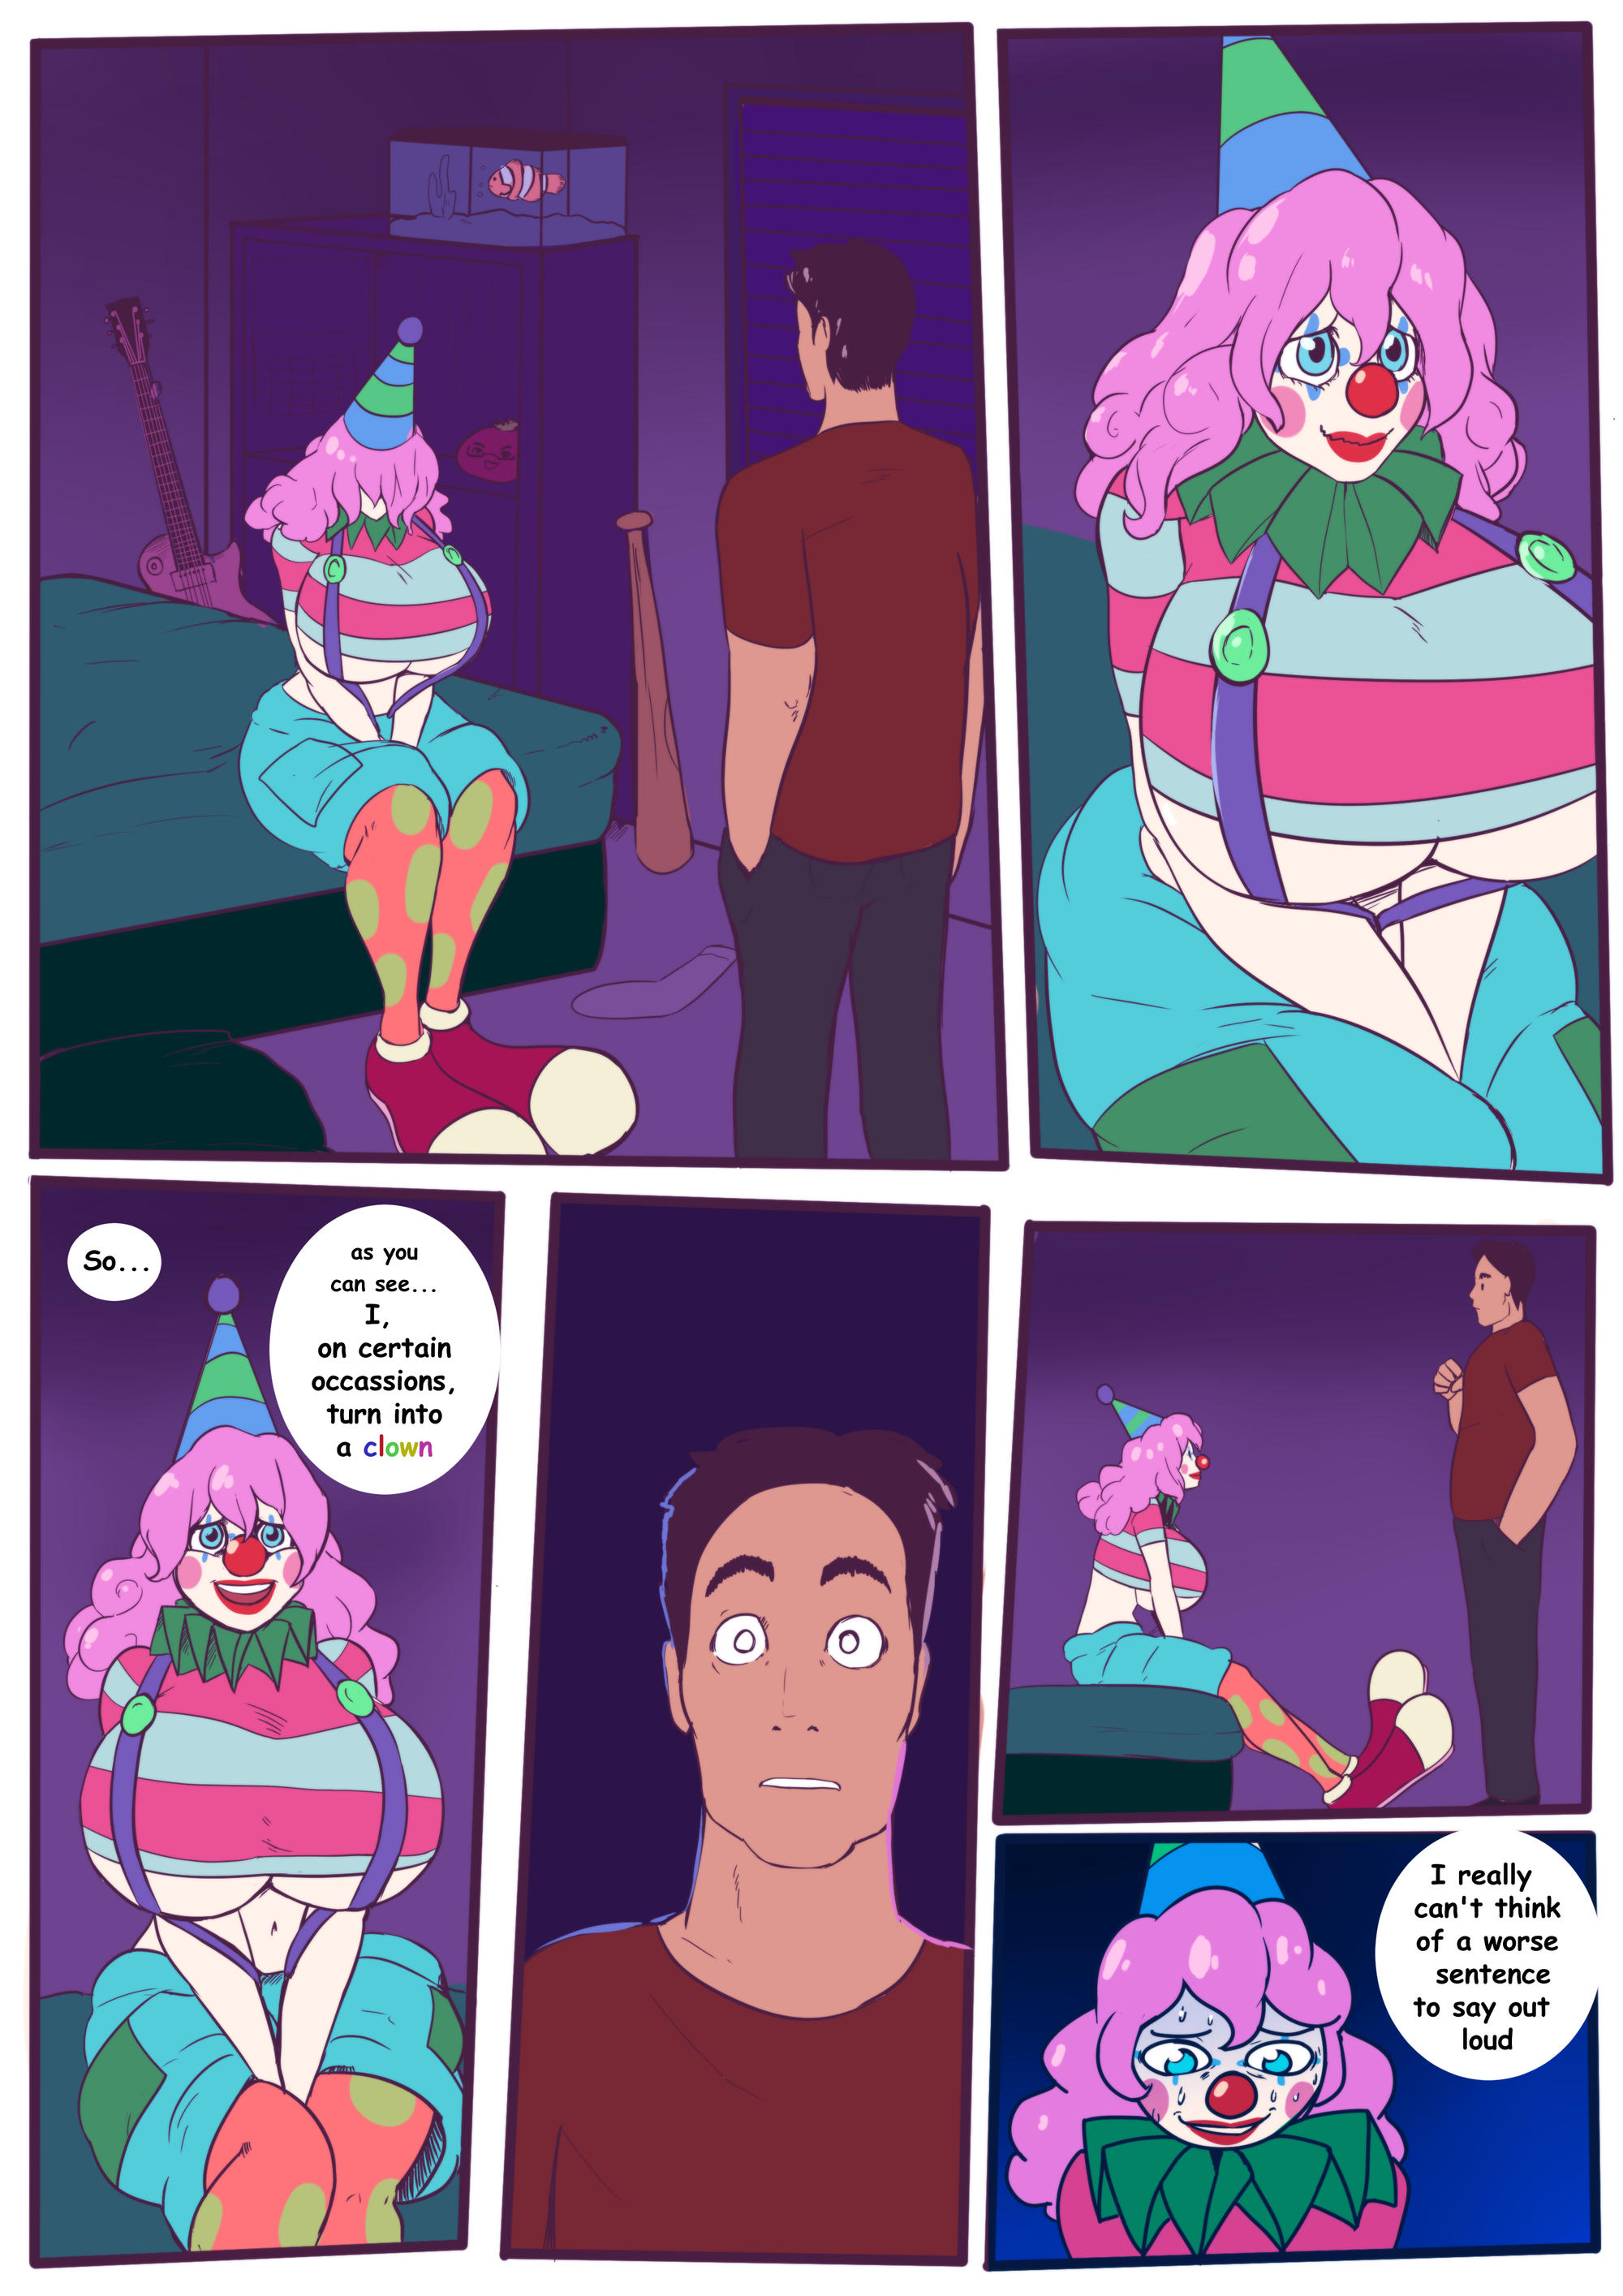 A perfectly normal comic where nothing weird happens